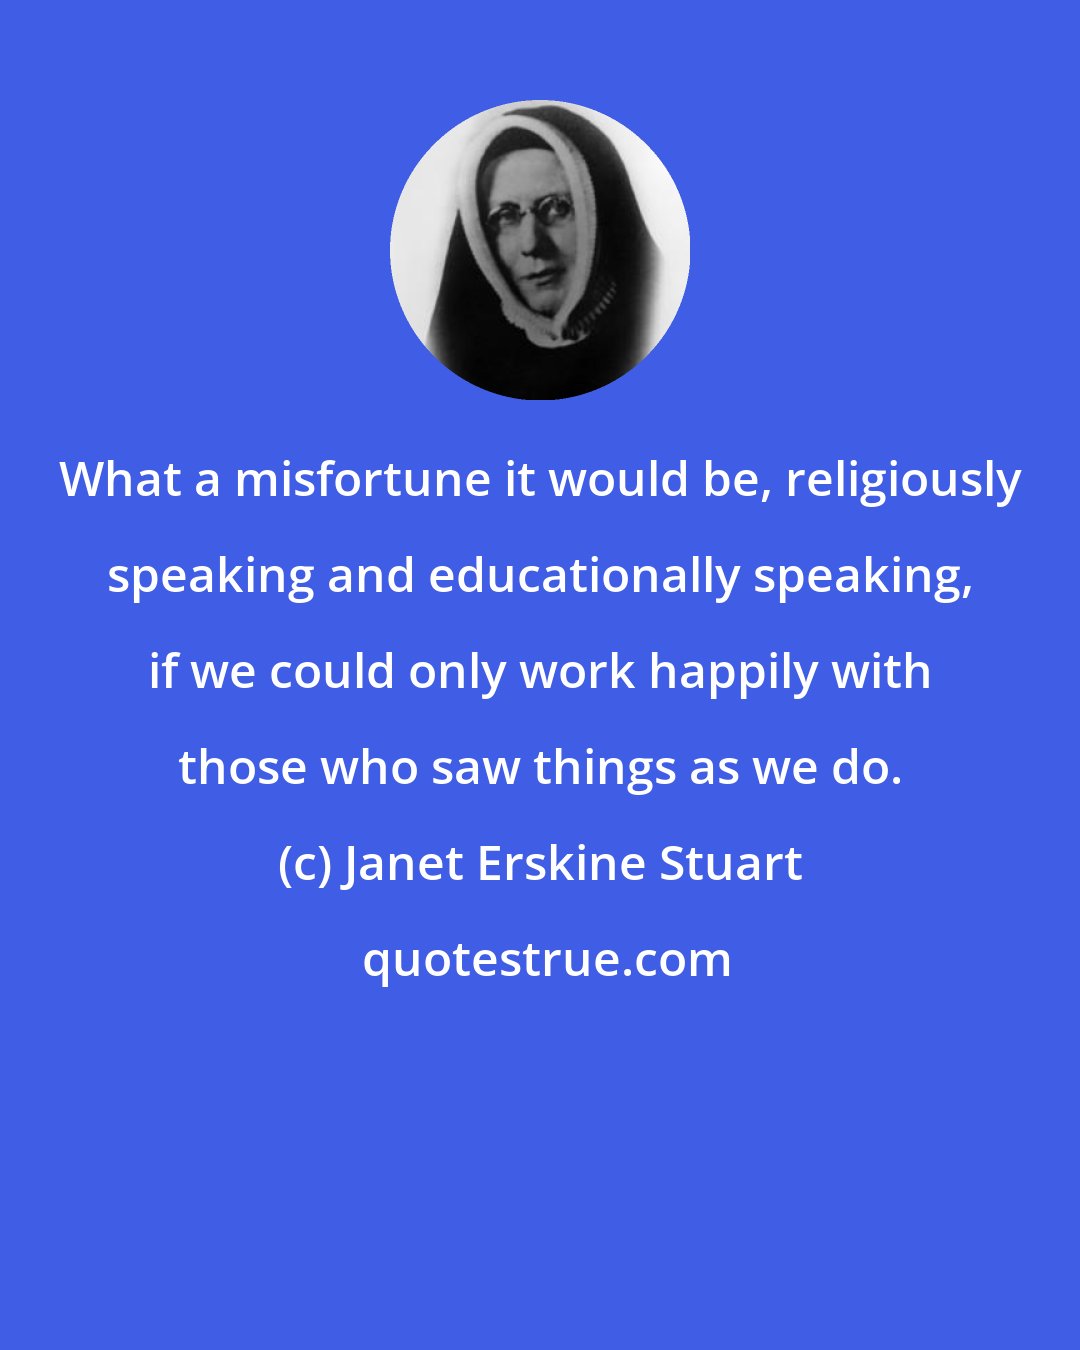 Janet Erskine Stuart: What a misfortune it would be, religiously speaking and educationally speaking, if we could only work happily with those who saw things as we do.